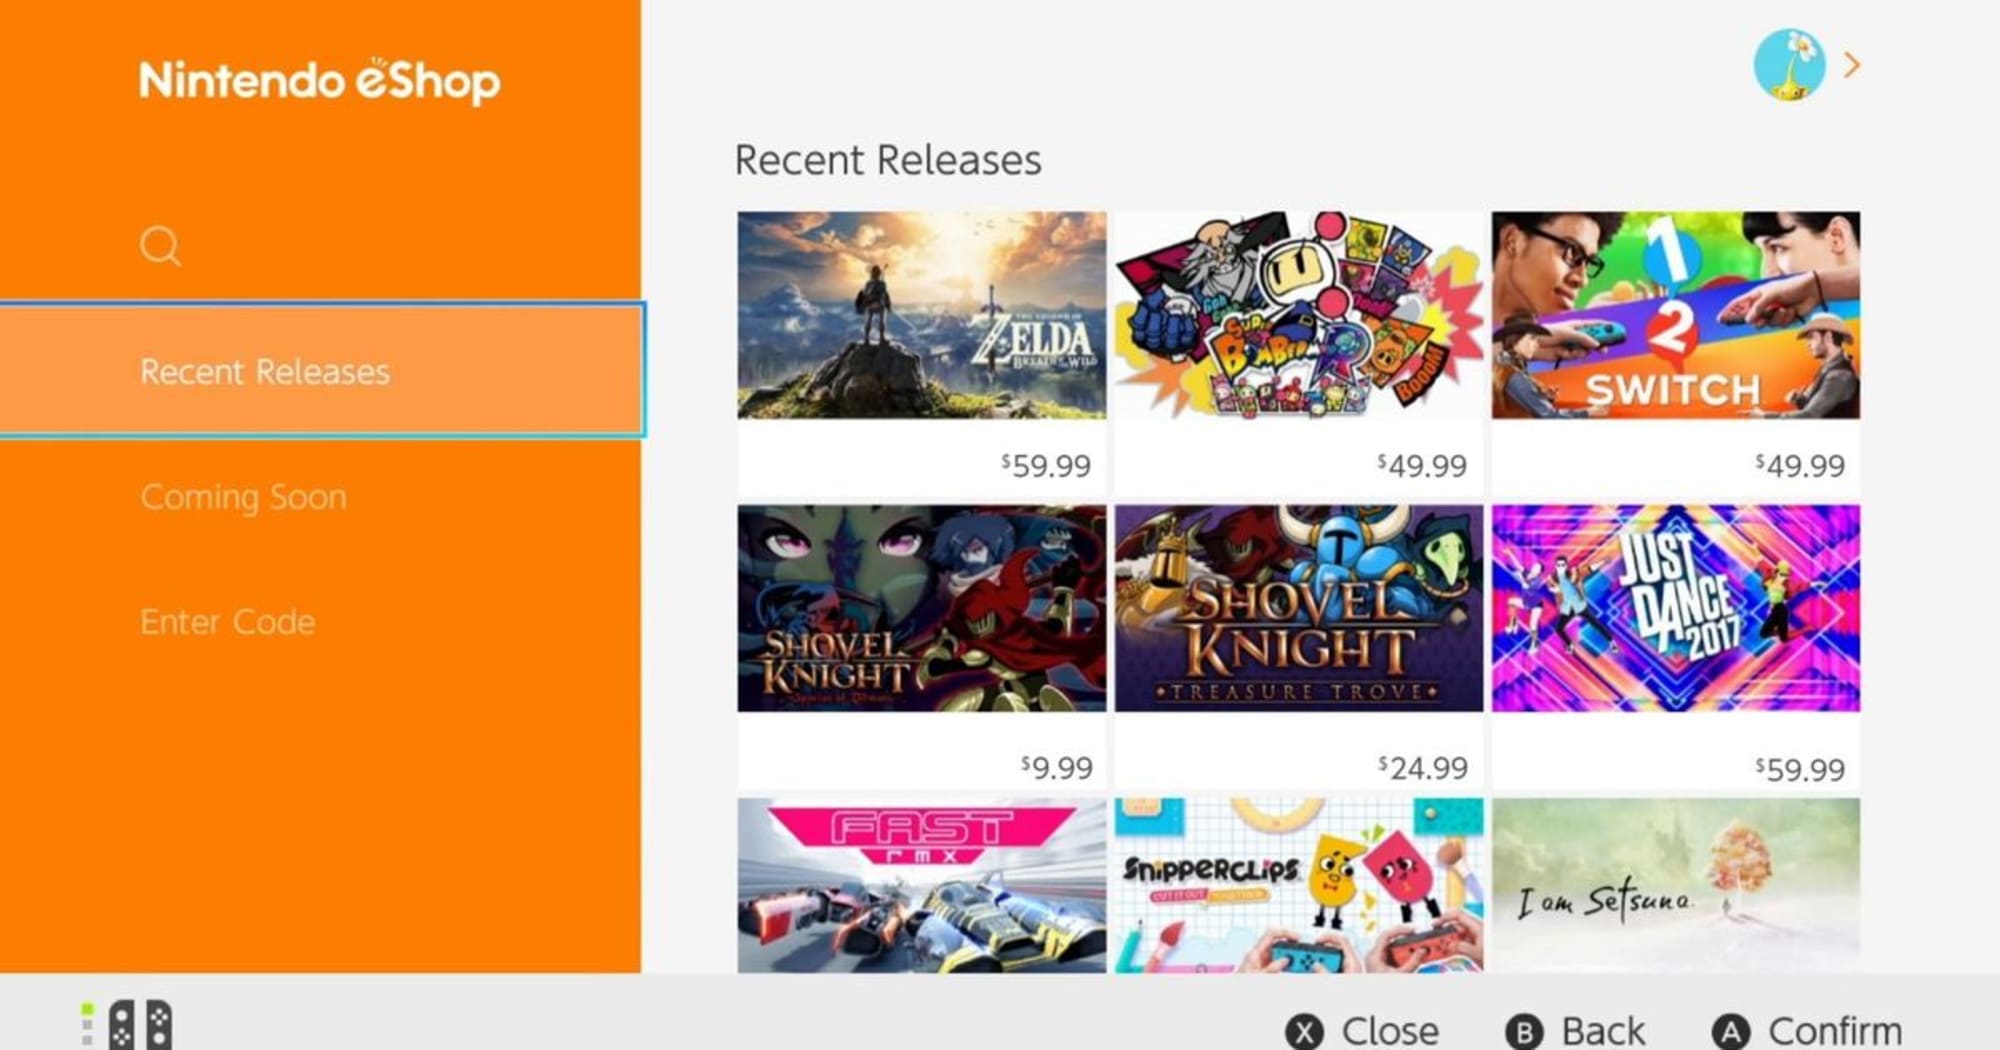 Barber mikroskopisk dårlig The Nintendo Switch eShop Is An Inexcusable Mess